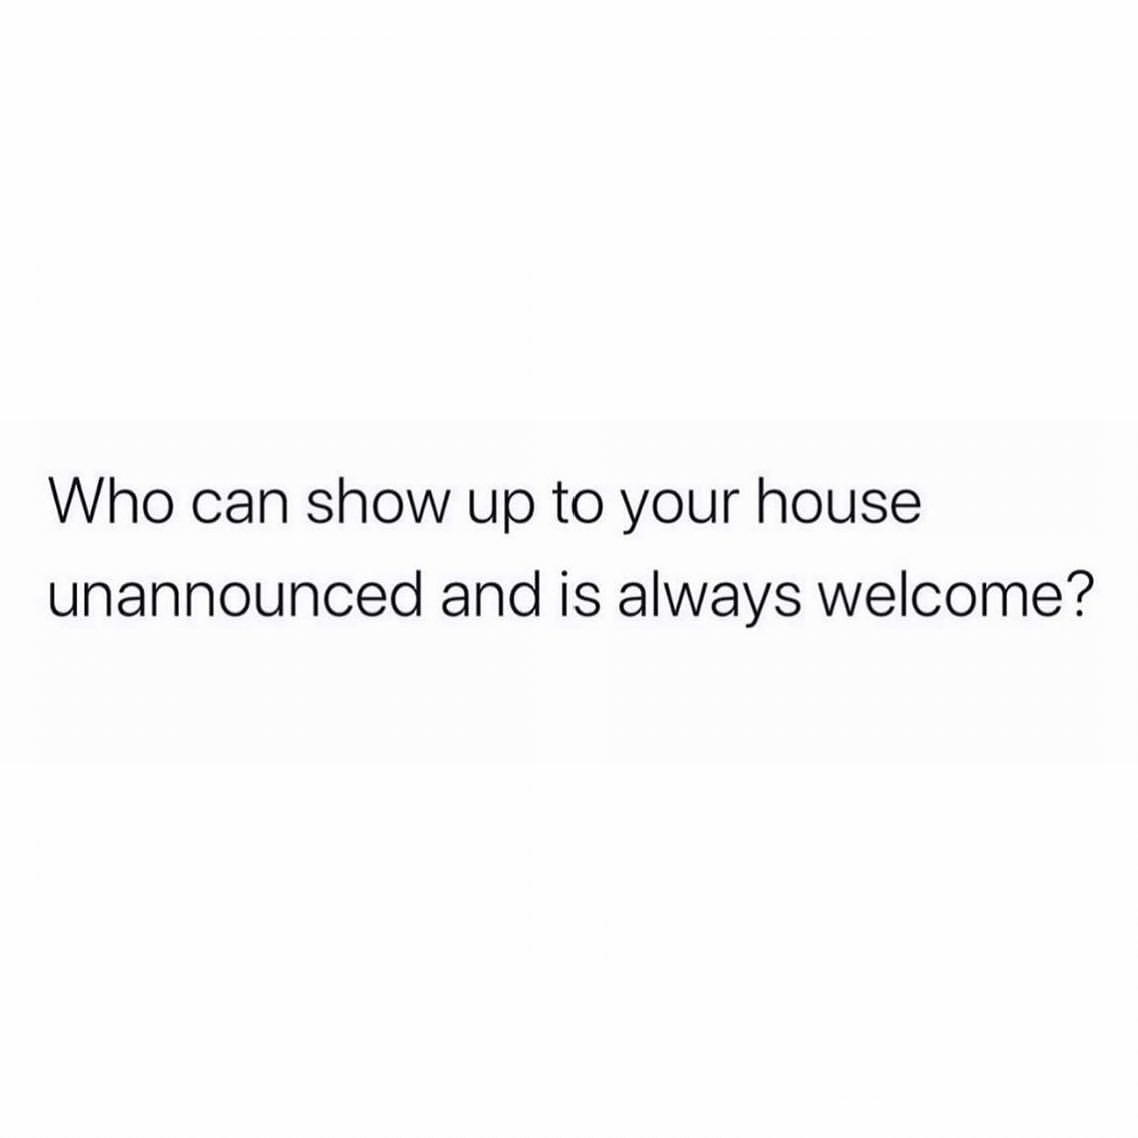 Who can show up to your house unannounced and is always welcome?